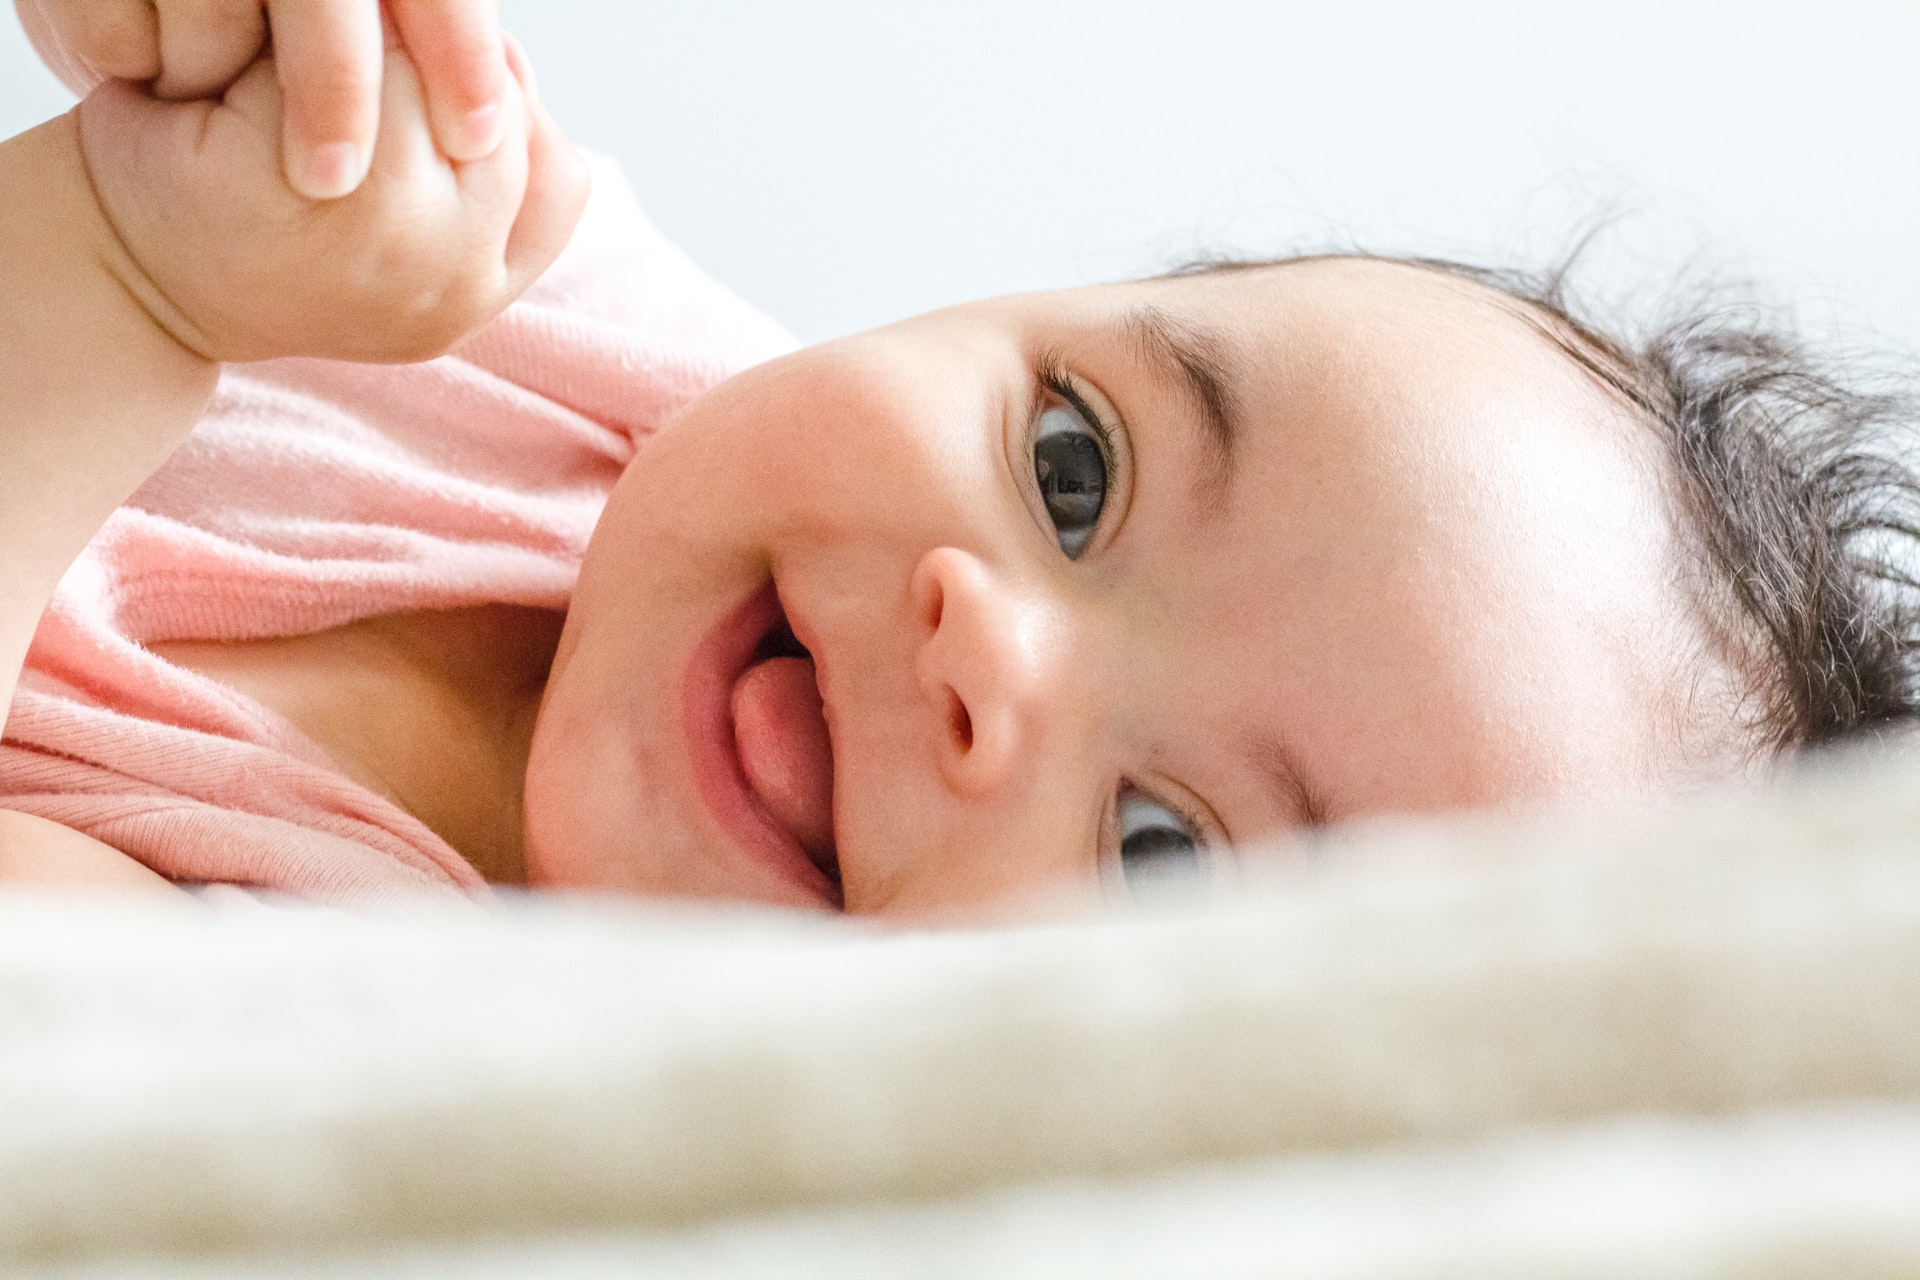 Girl Baby Names That Mean Innocent or Pure